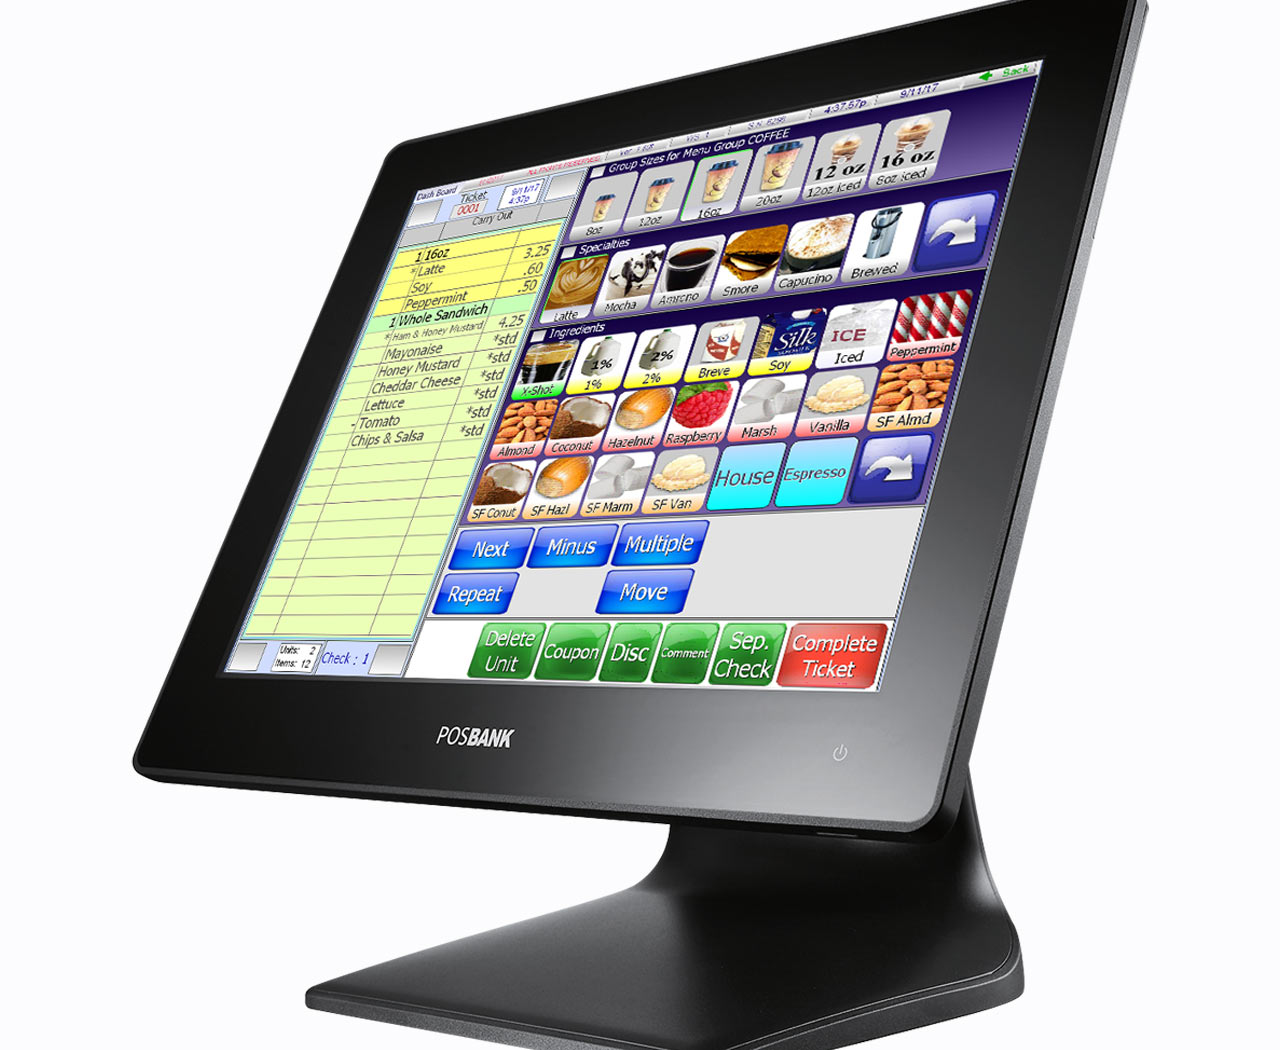 Menu Group in SelbySoft POS